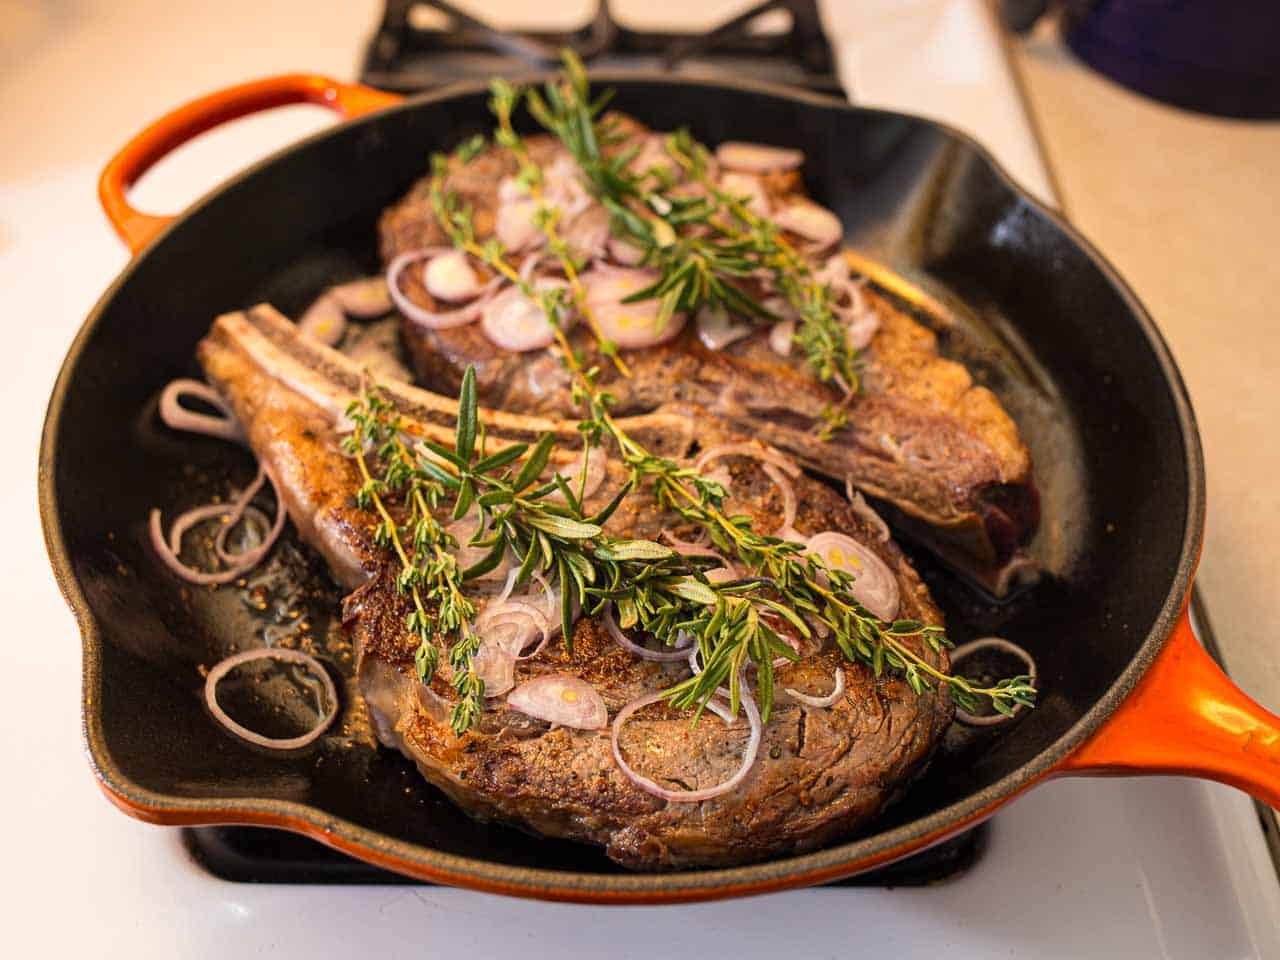 Cast Iron Ribeye, Pan-Seared and Herb Butter Basted - DadCooksDinner